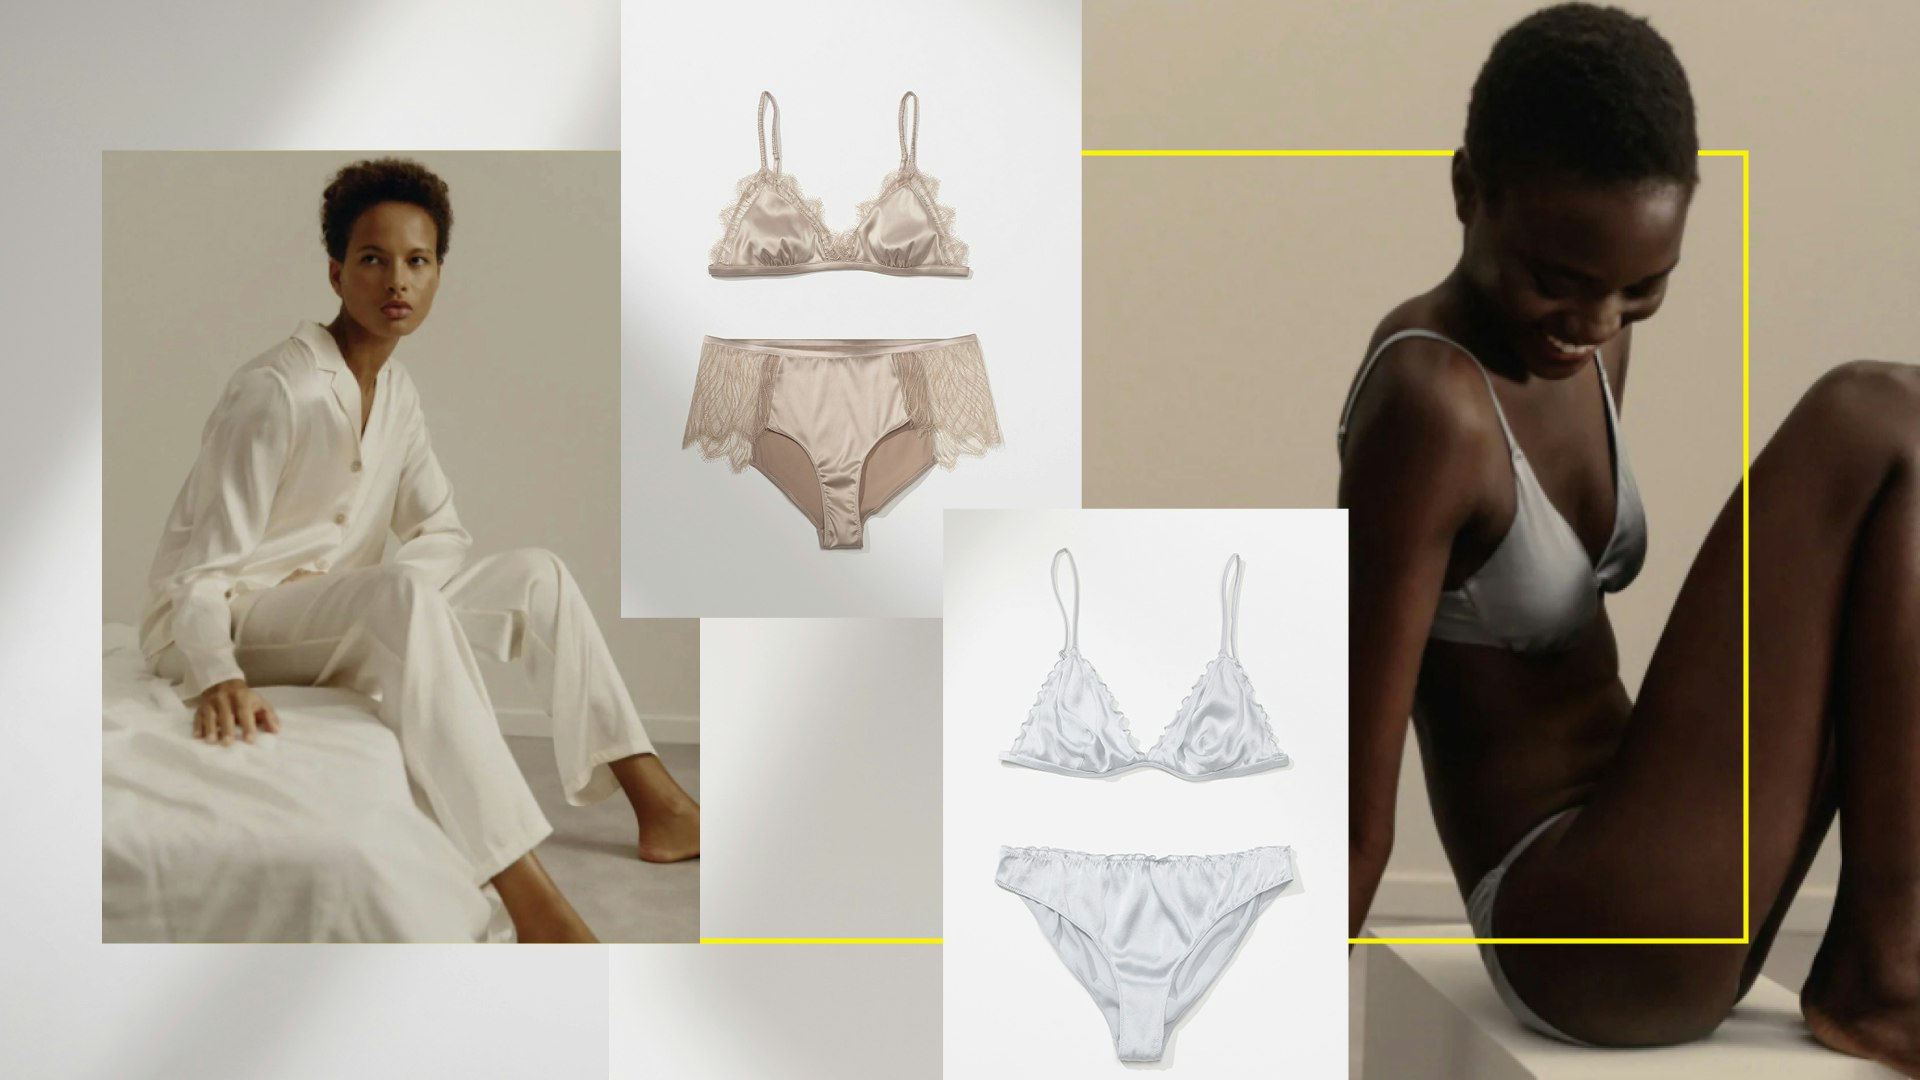 Zara's First Ever Lingerie Collection Is Here And Includes Sleepwear